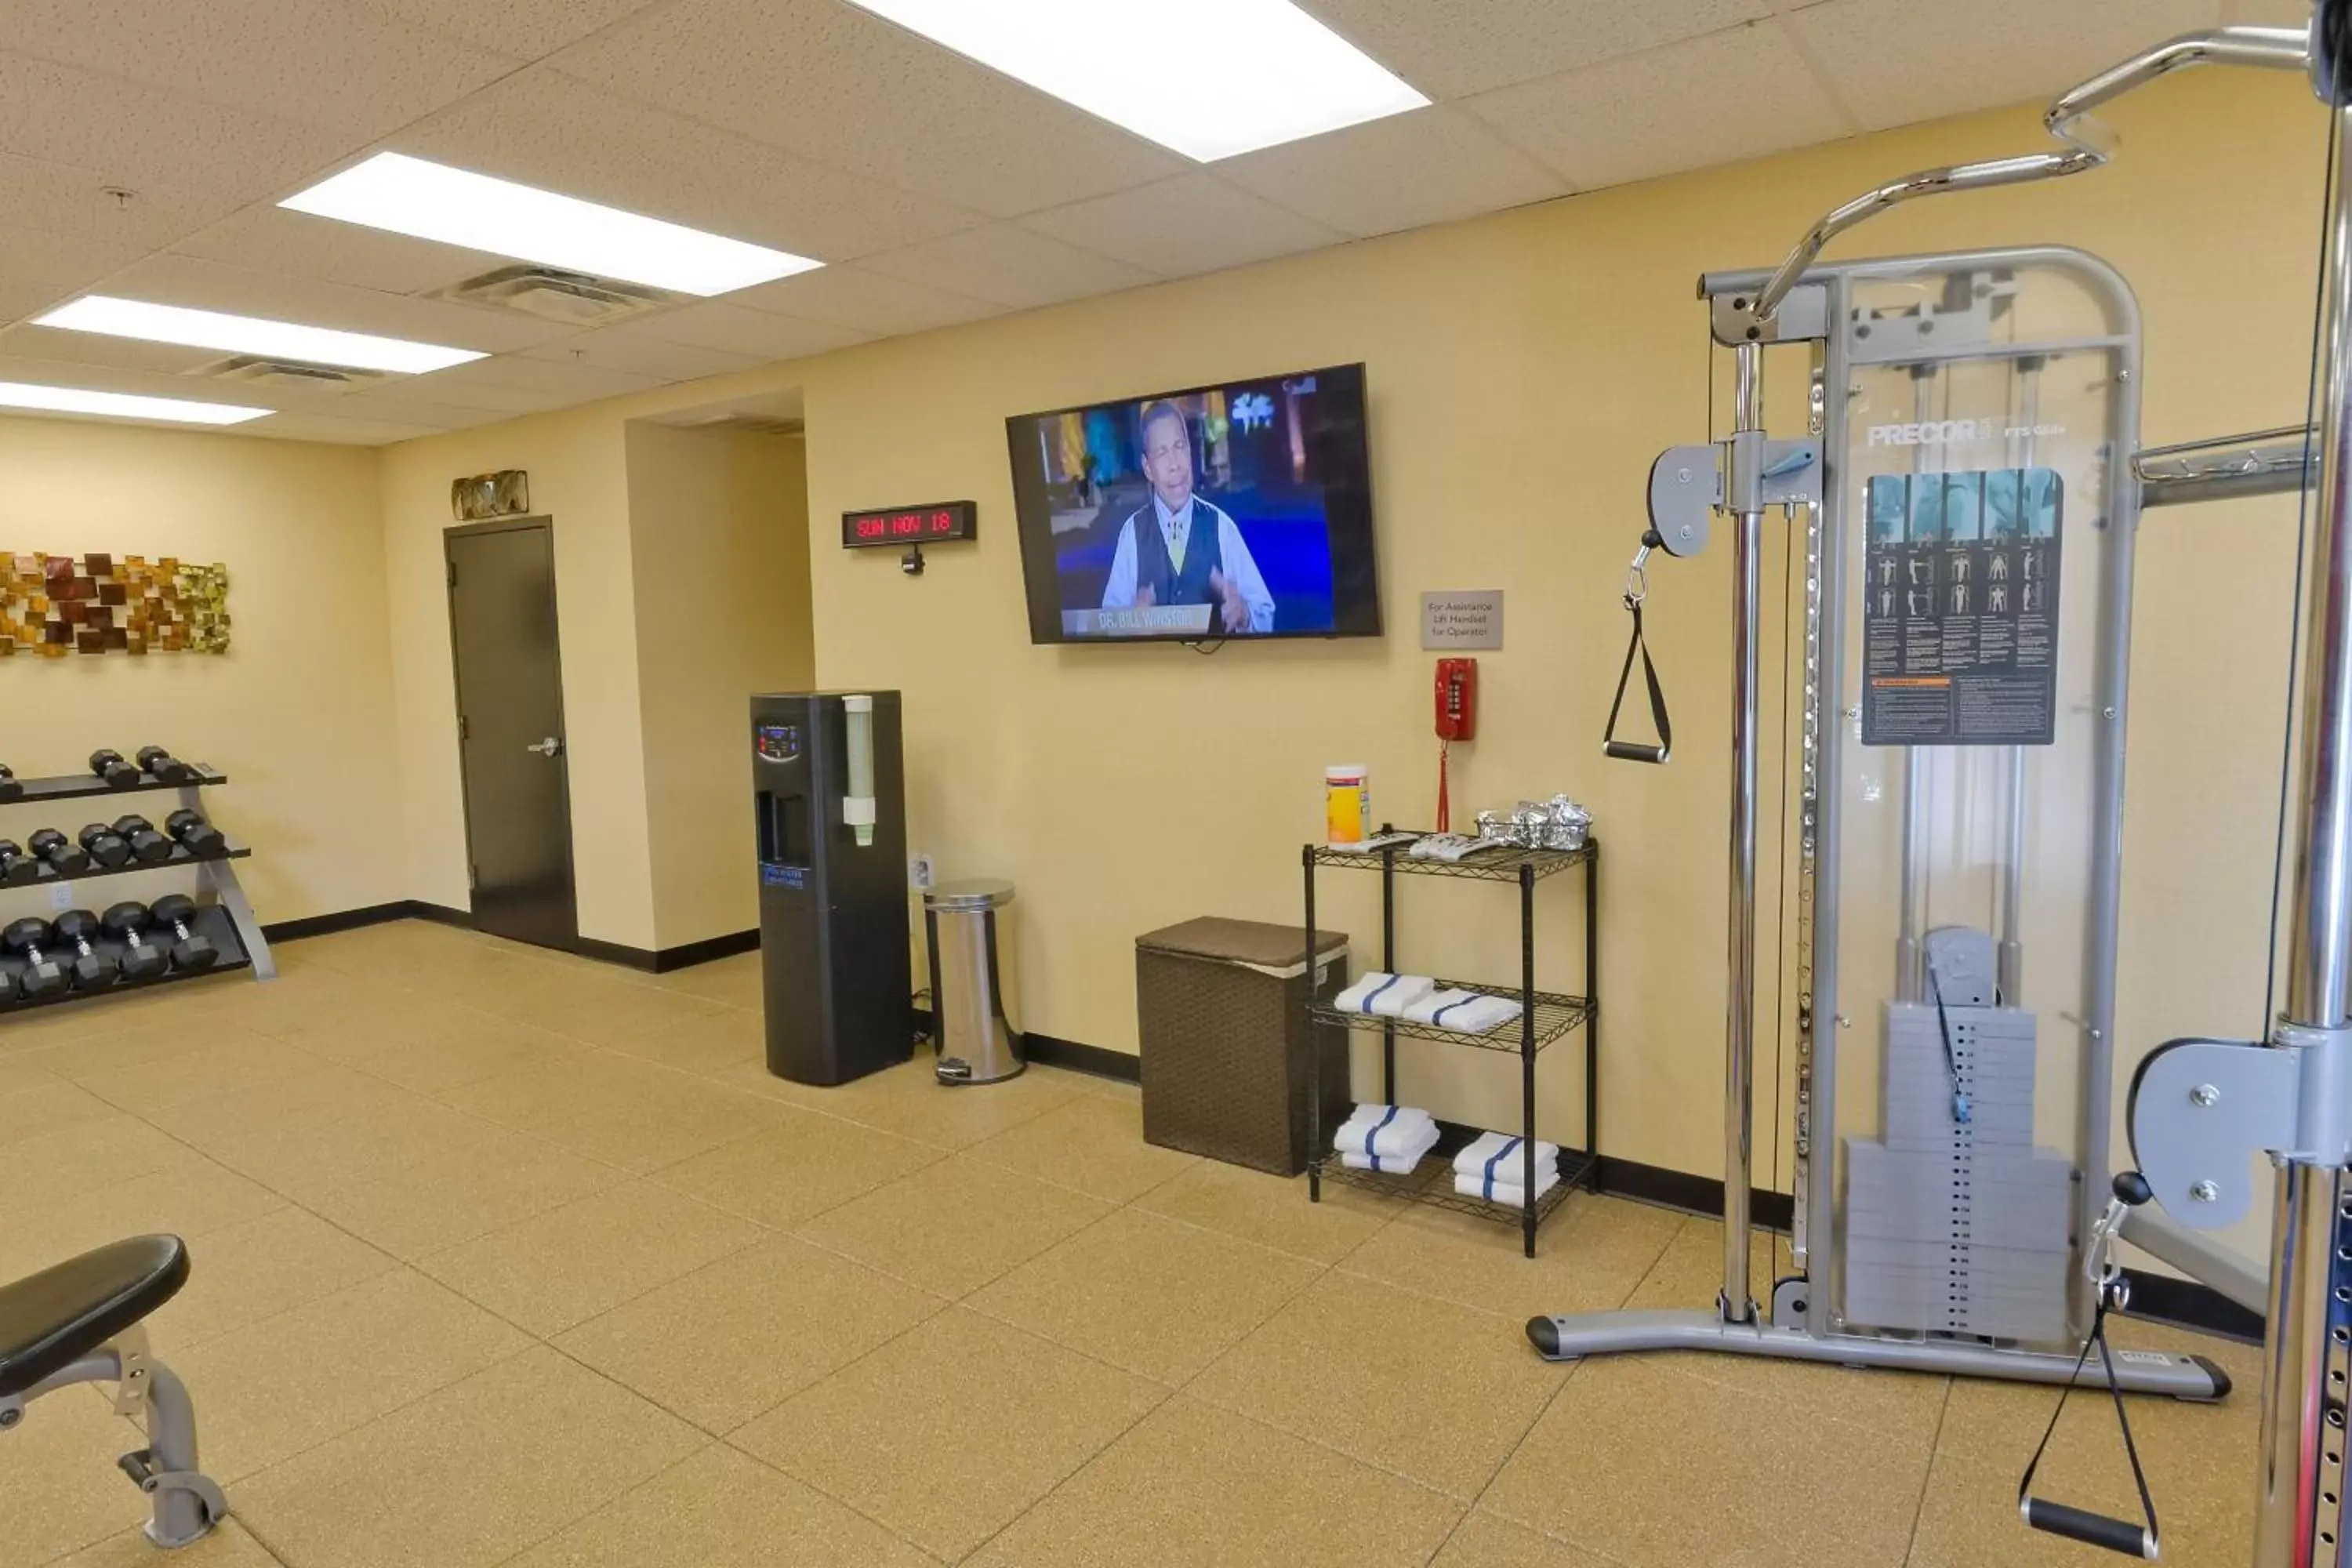 Fitness centre/facilities, Fitness Center/Facilities in Courtyard Salt Lake City Layton